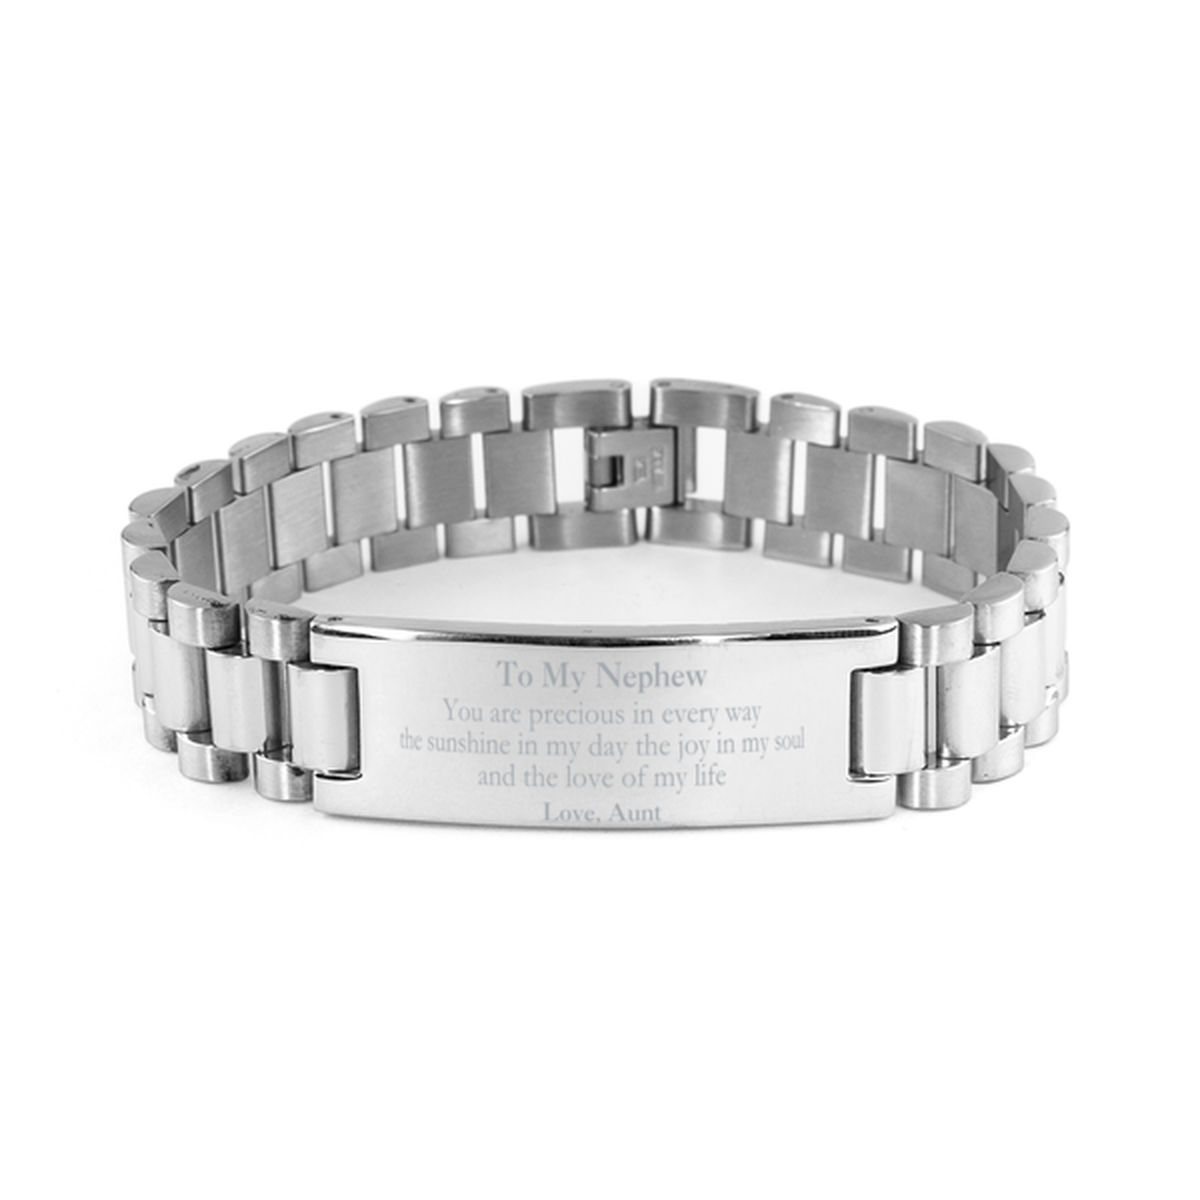 Graduation Gifts for Nephew Ladder Stainless Steel Bracelet Present from Aunt, Christmas Nephew Birthday Gifts Nephew You are precious in every way the sunshine in my day. Love, Aunt